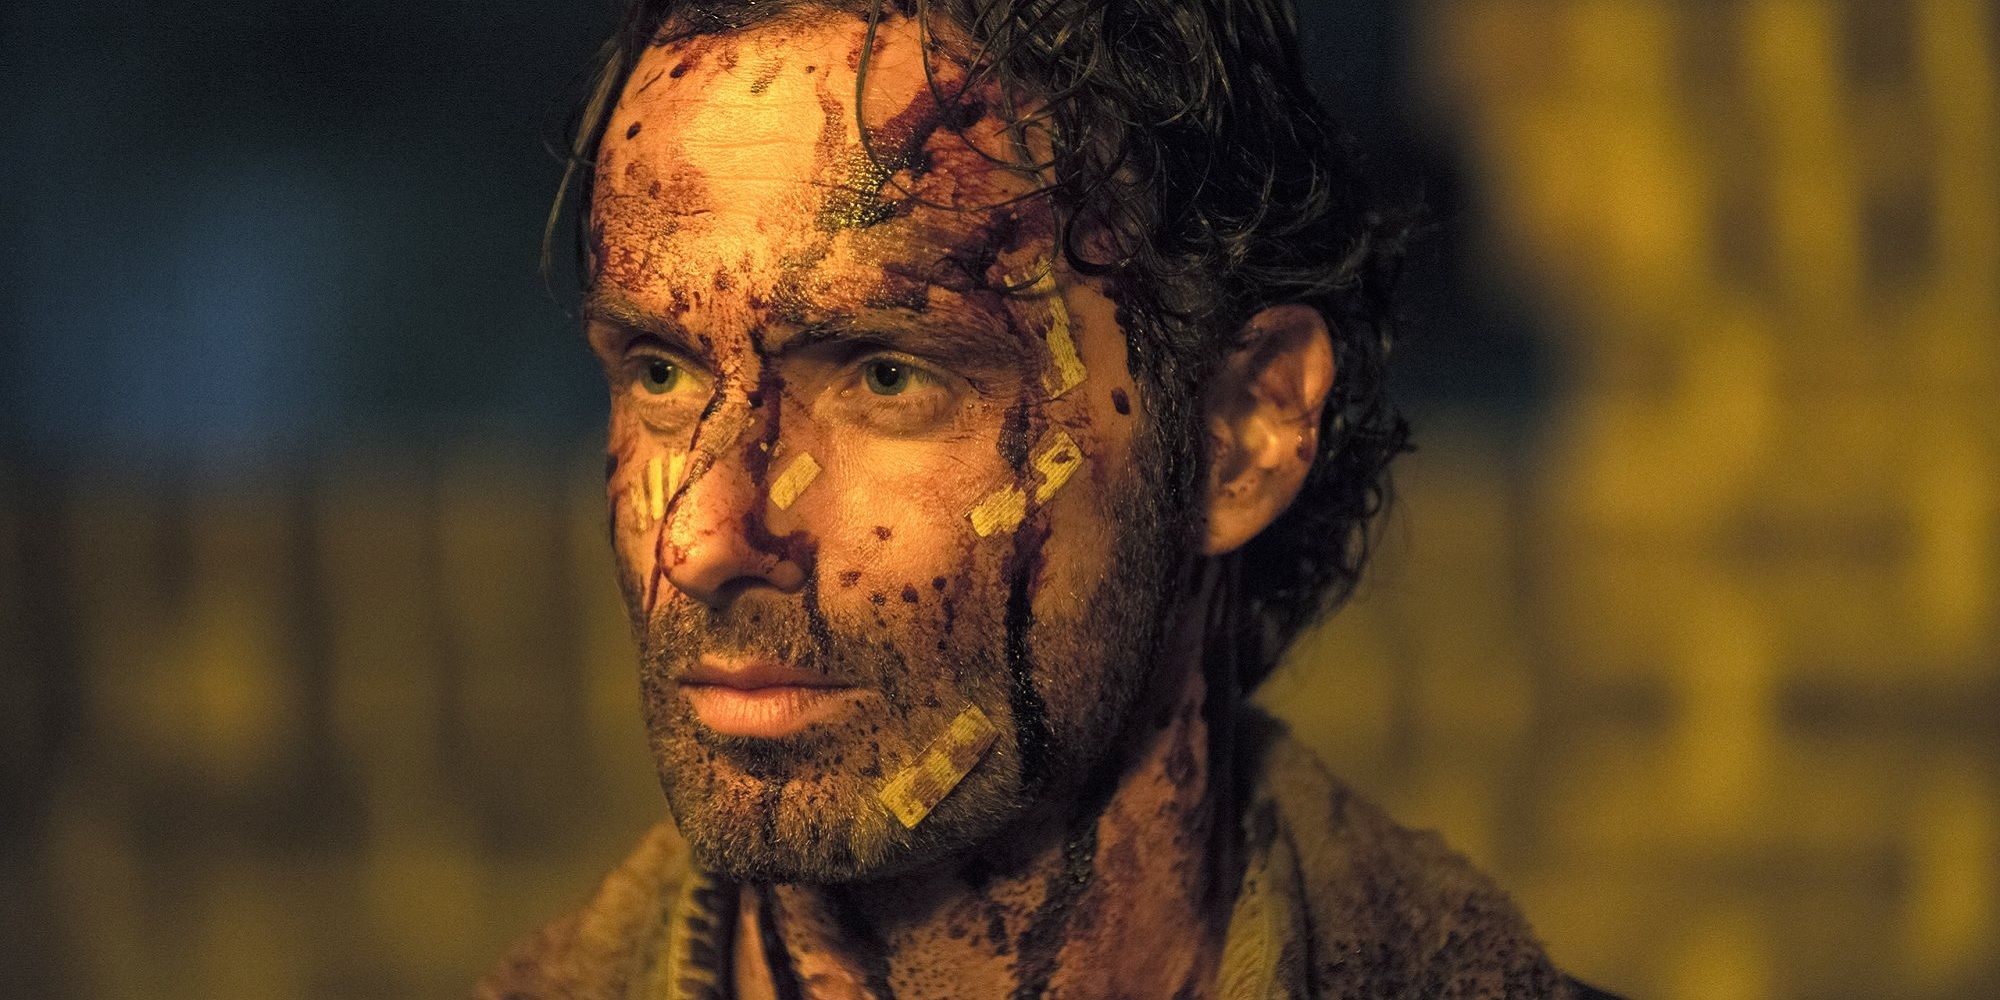 Andrew Lincoln as Rick Grimes in The Walking Dead season 6